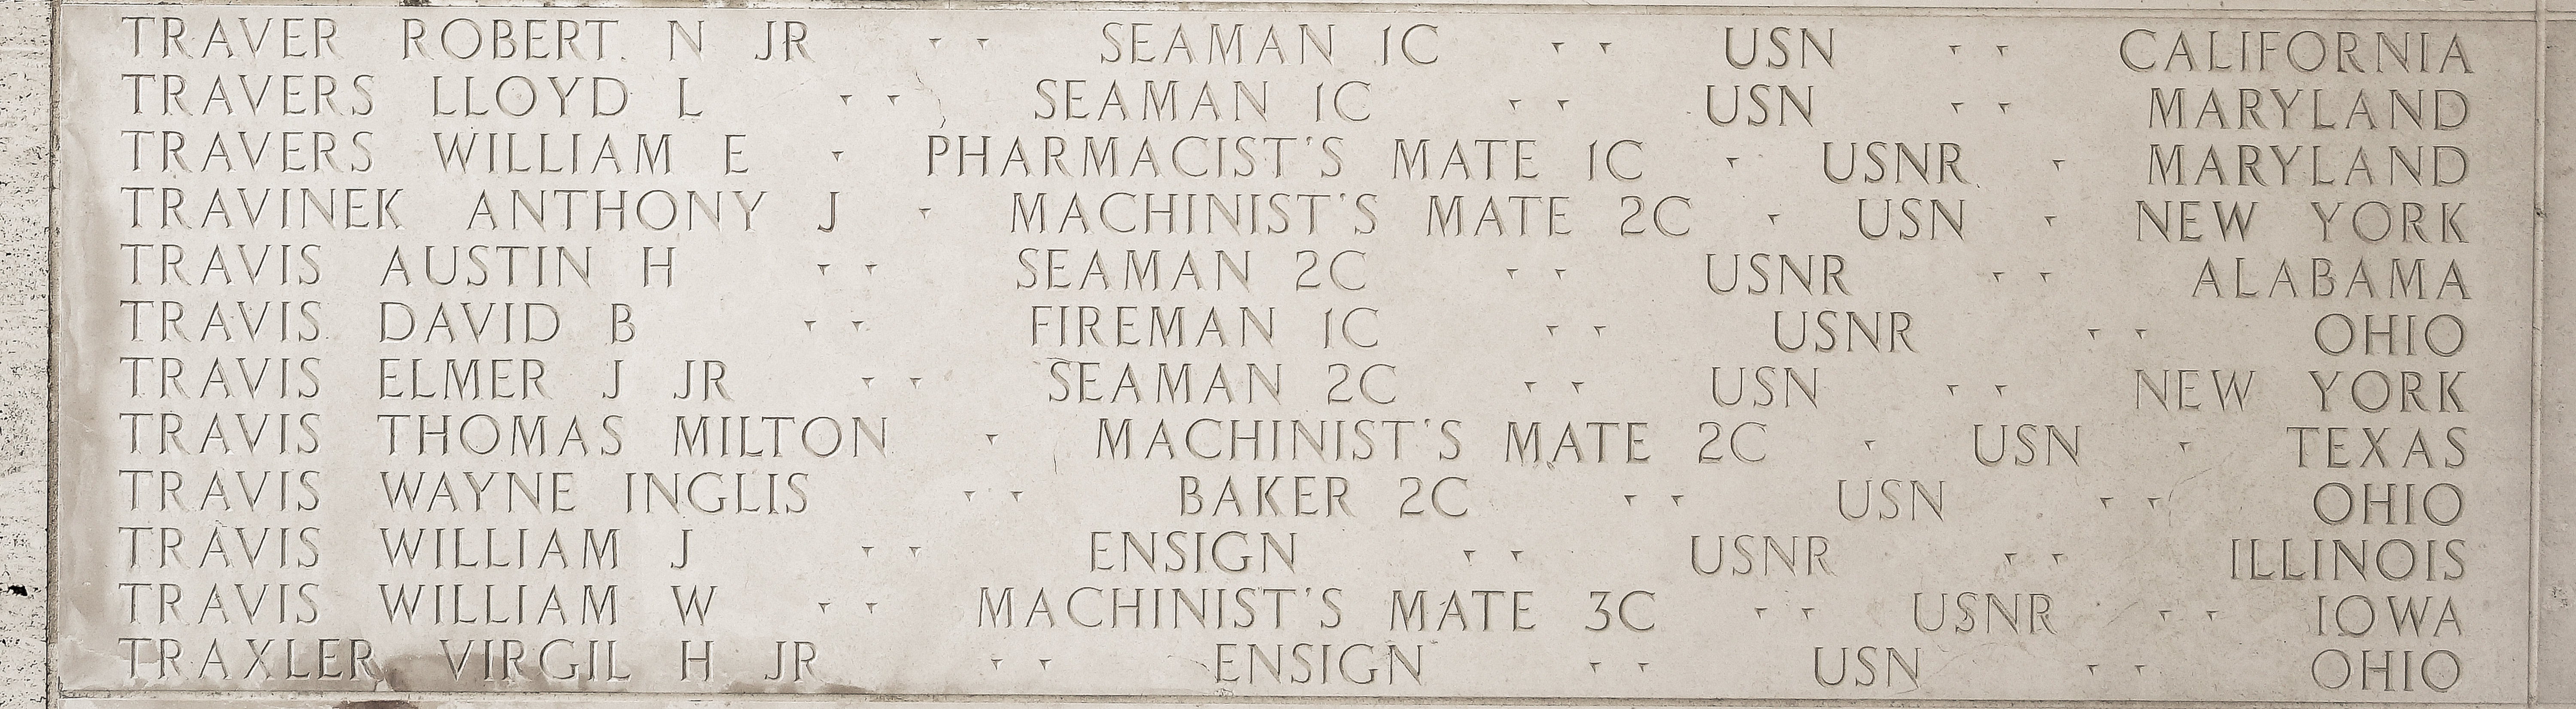 William E. Travers, Pharmacist's Mate First Class